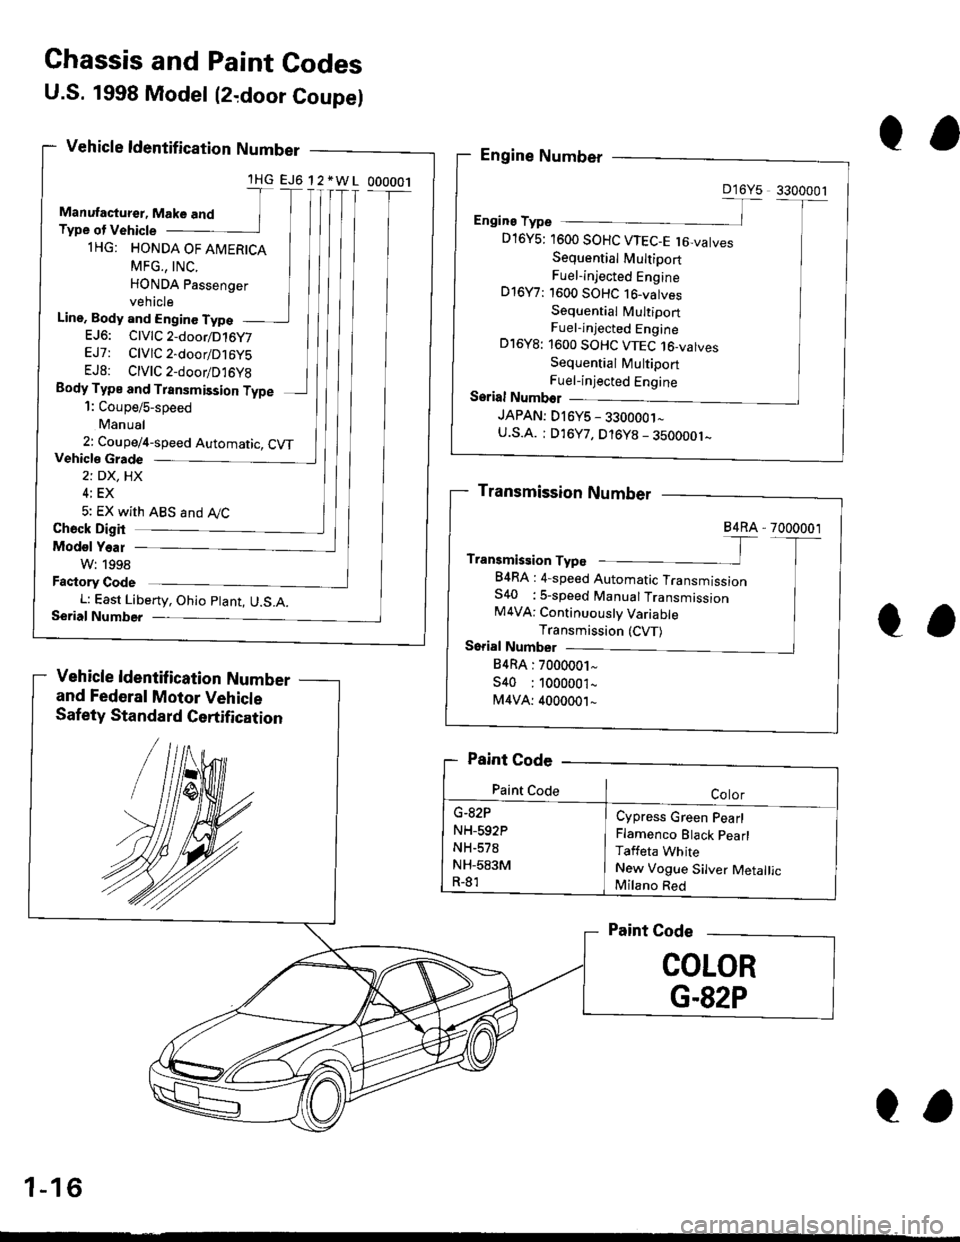 HONDA CIVIC 1998 6.G Workshop Manual Ghassis and Paint Codes
U.S. 1998 Model (2,door Coupel
Vehicle ldentif ication Number
and Federal Motor Vehicle
Safety Standard Certification
lHG EJ6 12*WL 000001
Line, Body and Enginc TypeEJ6: ClVlC2